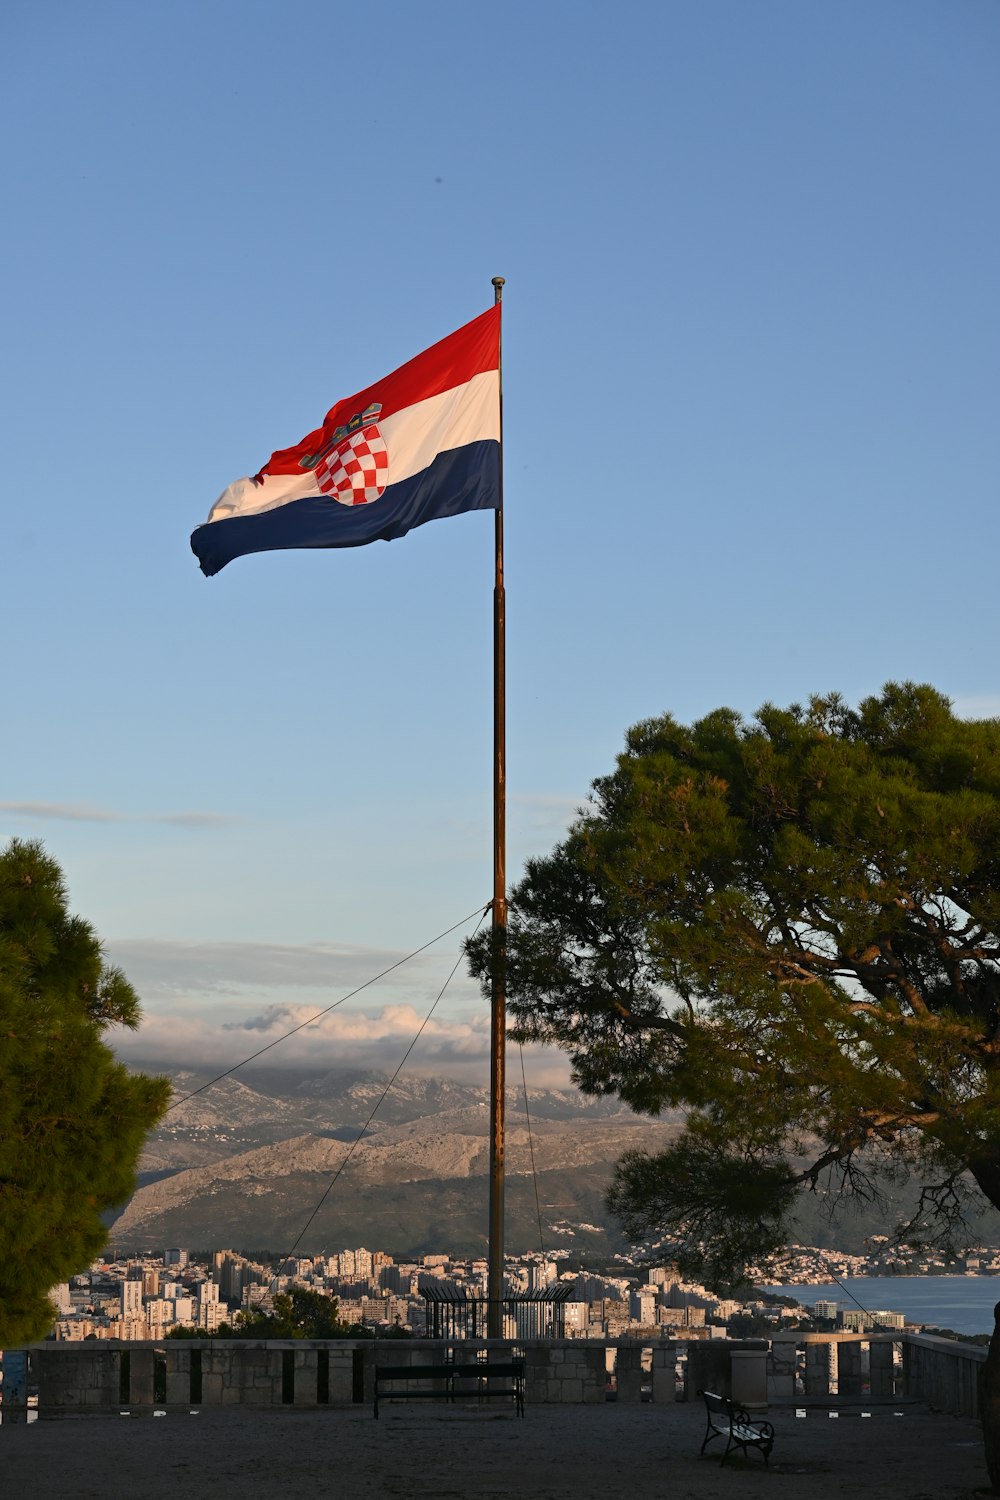 a flag flying in the wind with a city in the background